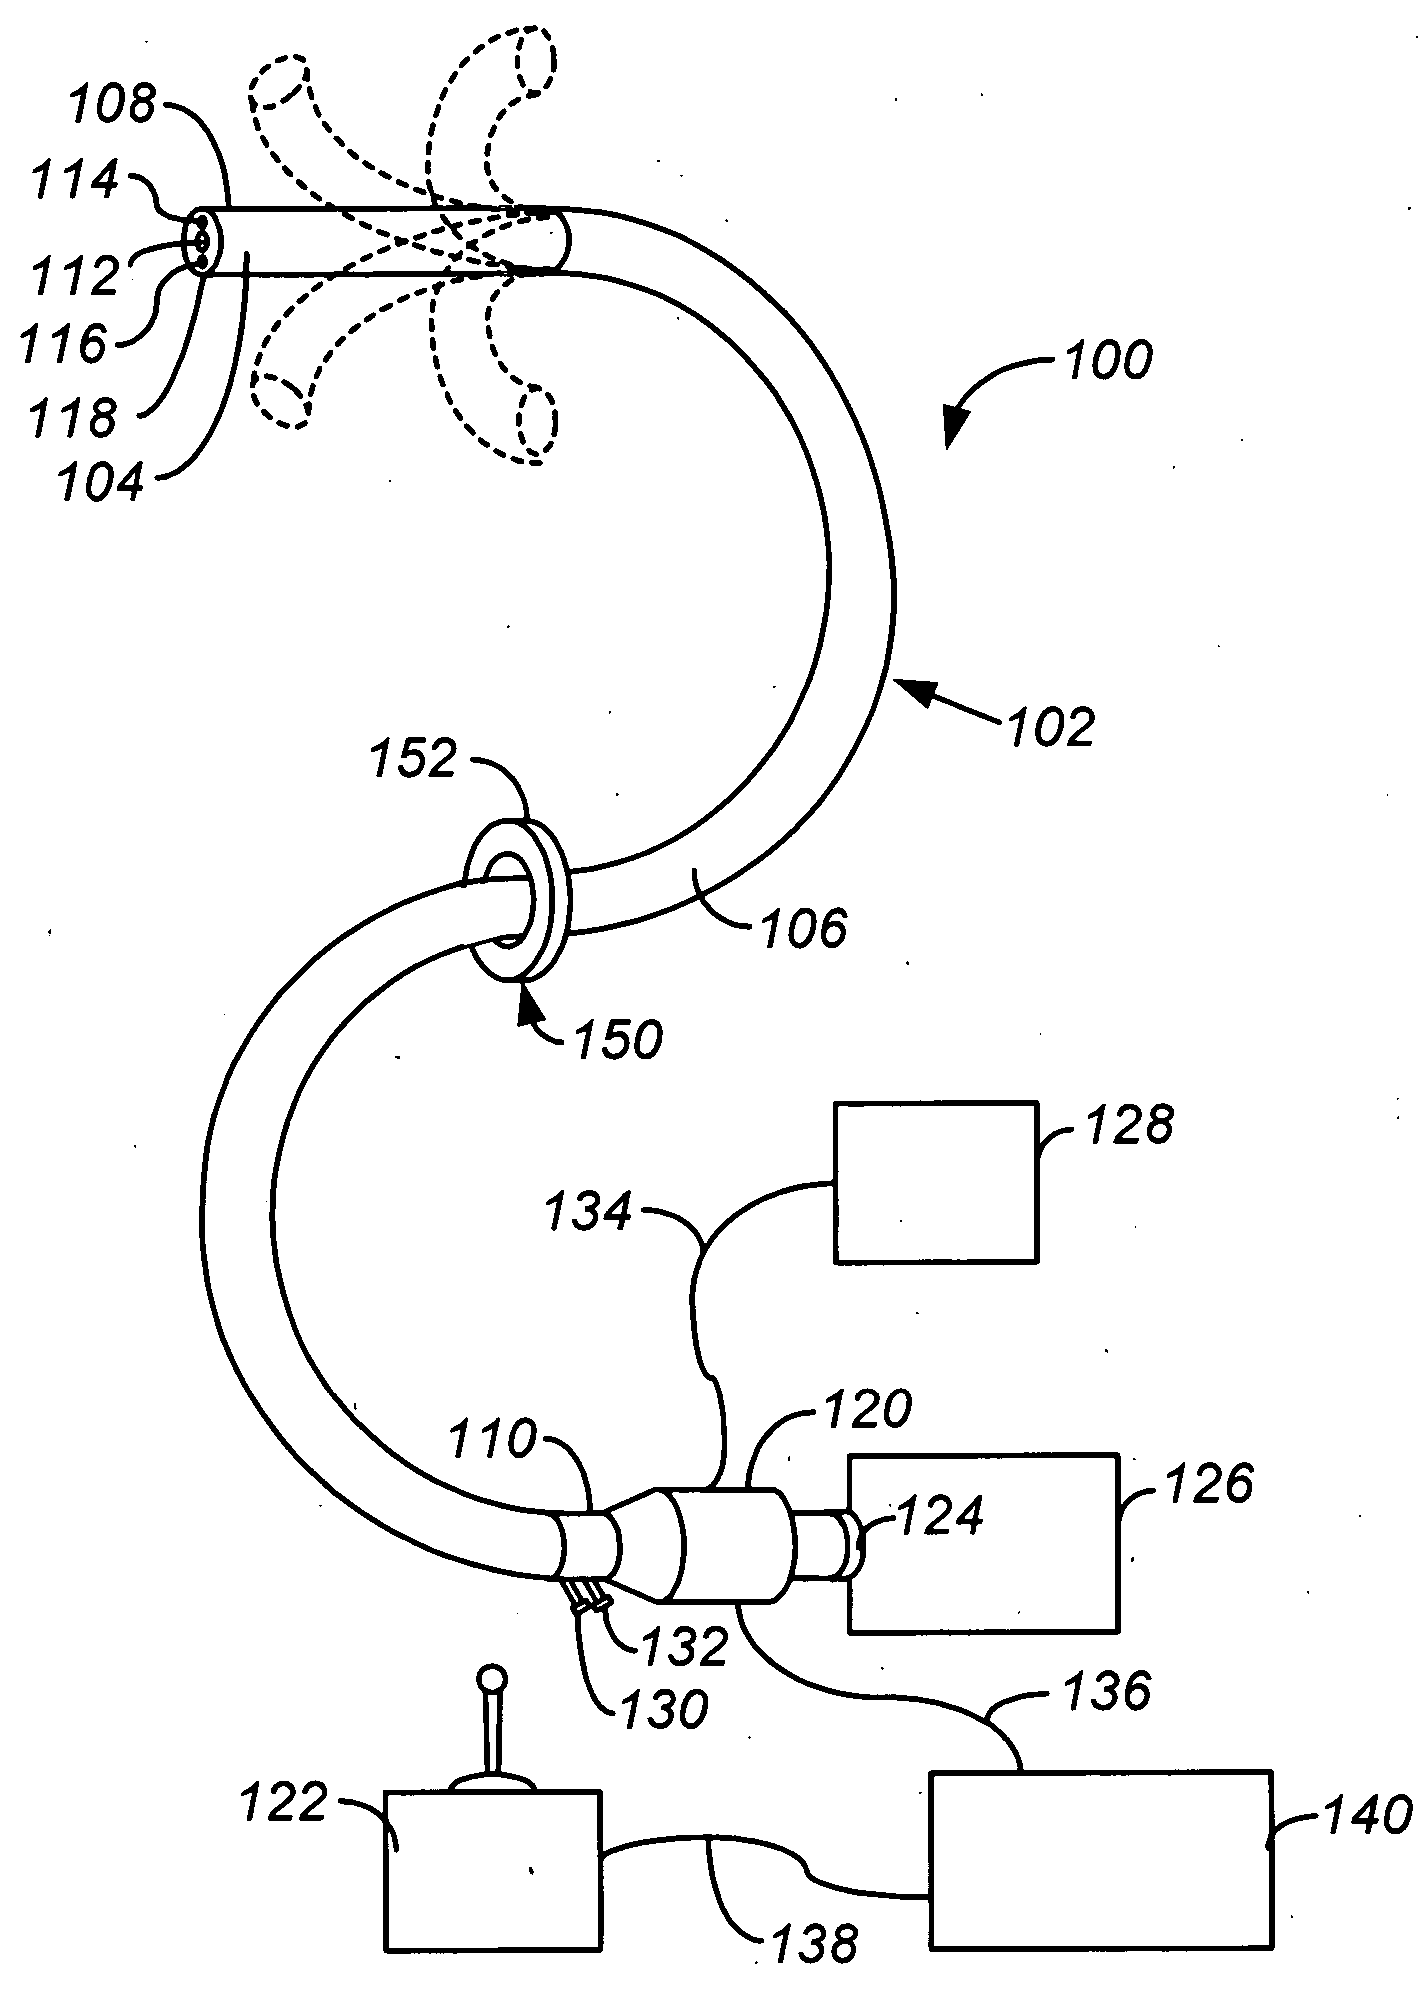 Apparatus and methods for facilitating treatment of tissue via improved delivery of energy based and non-energy based modalities